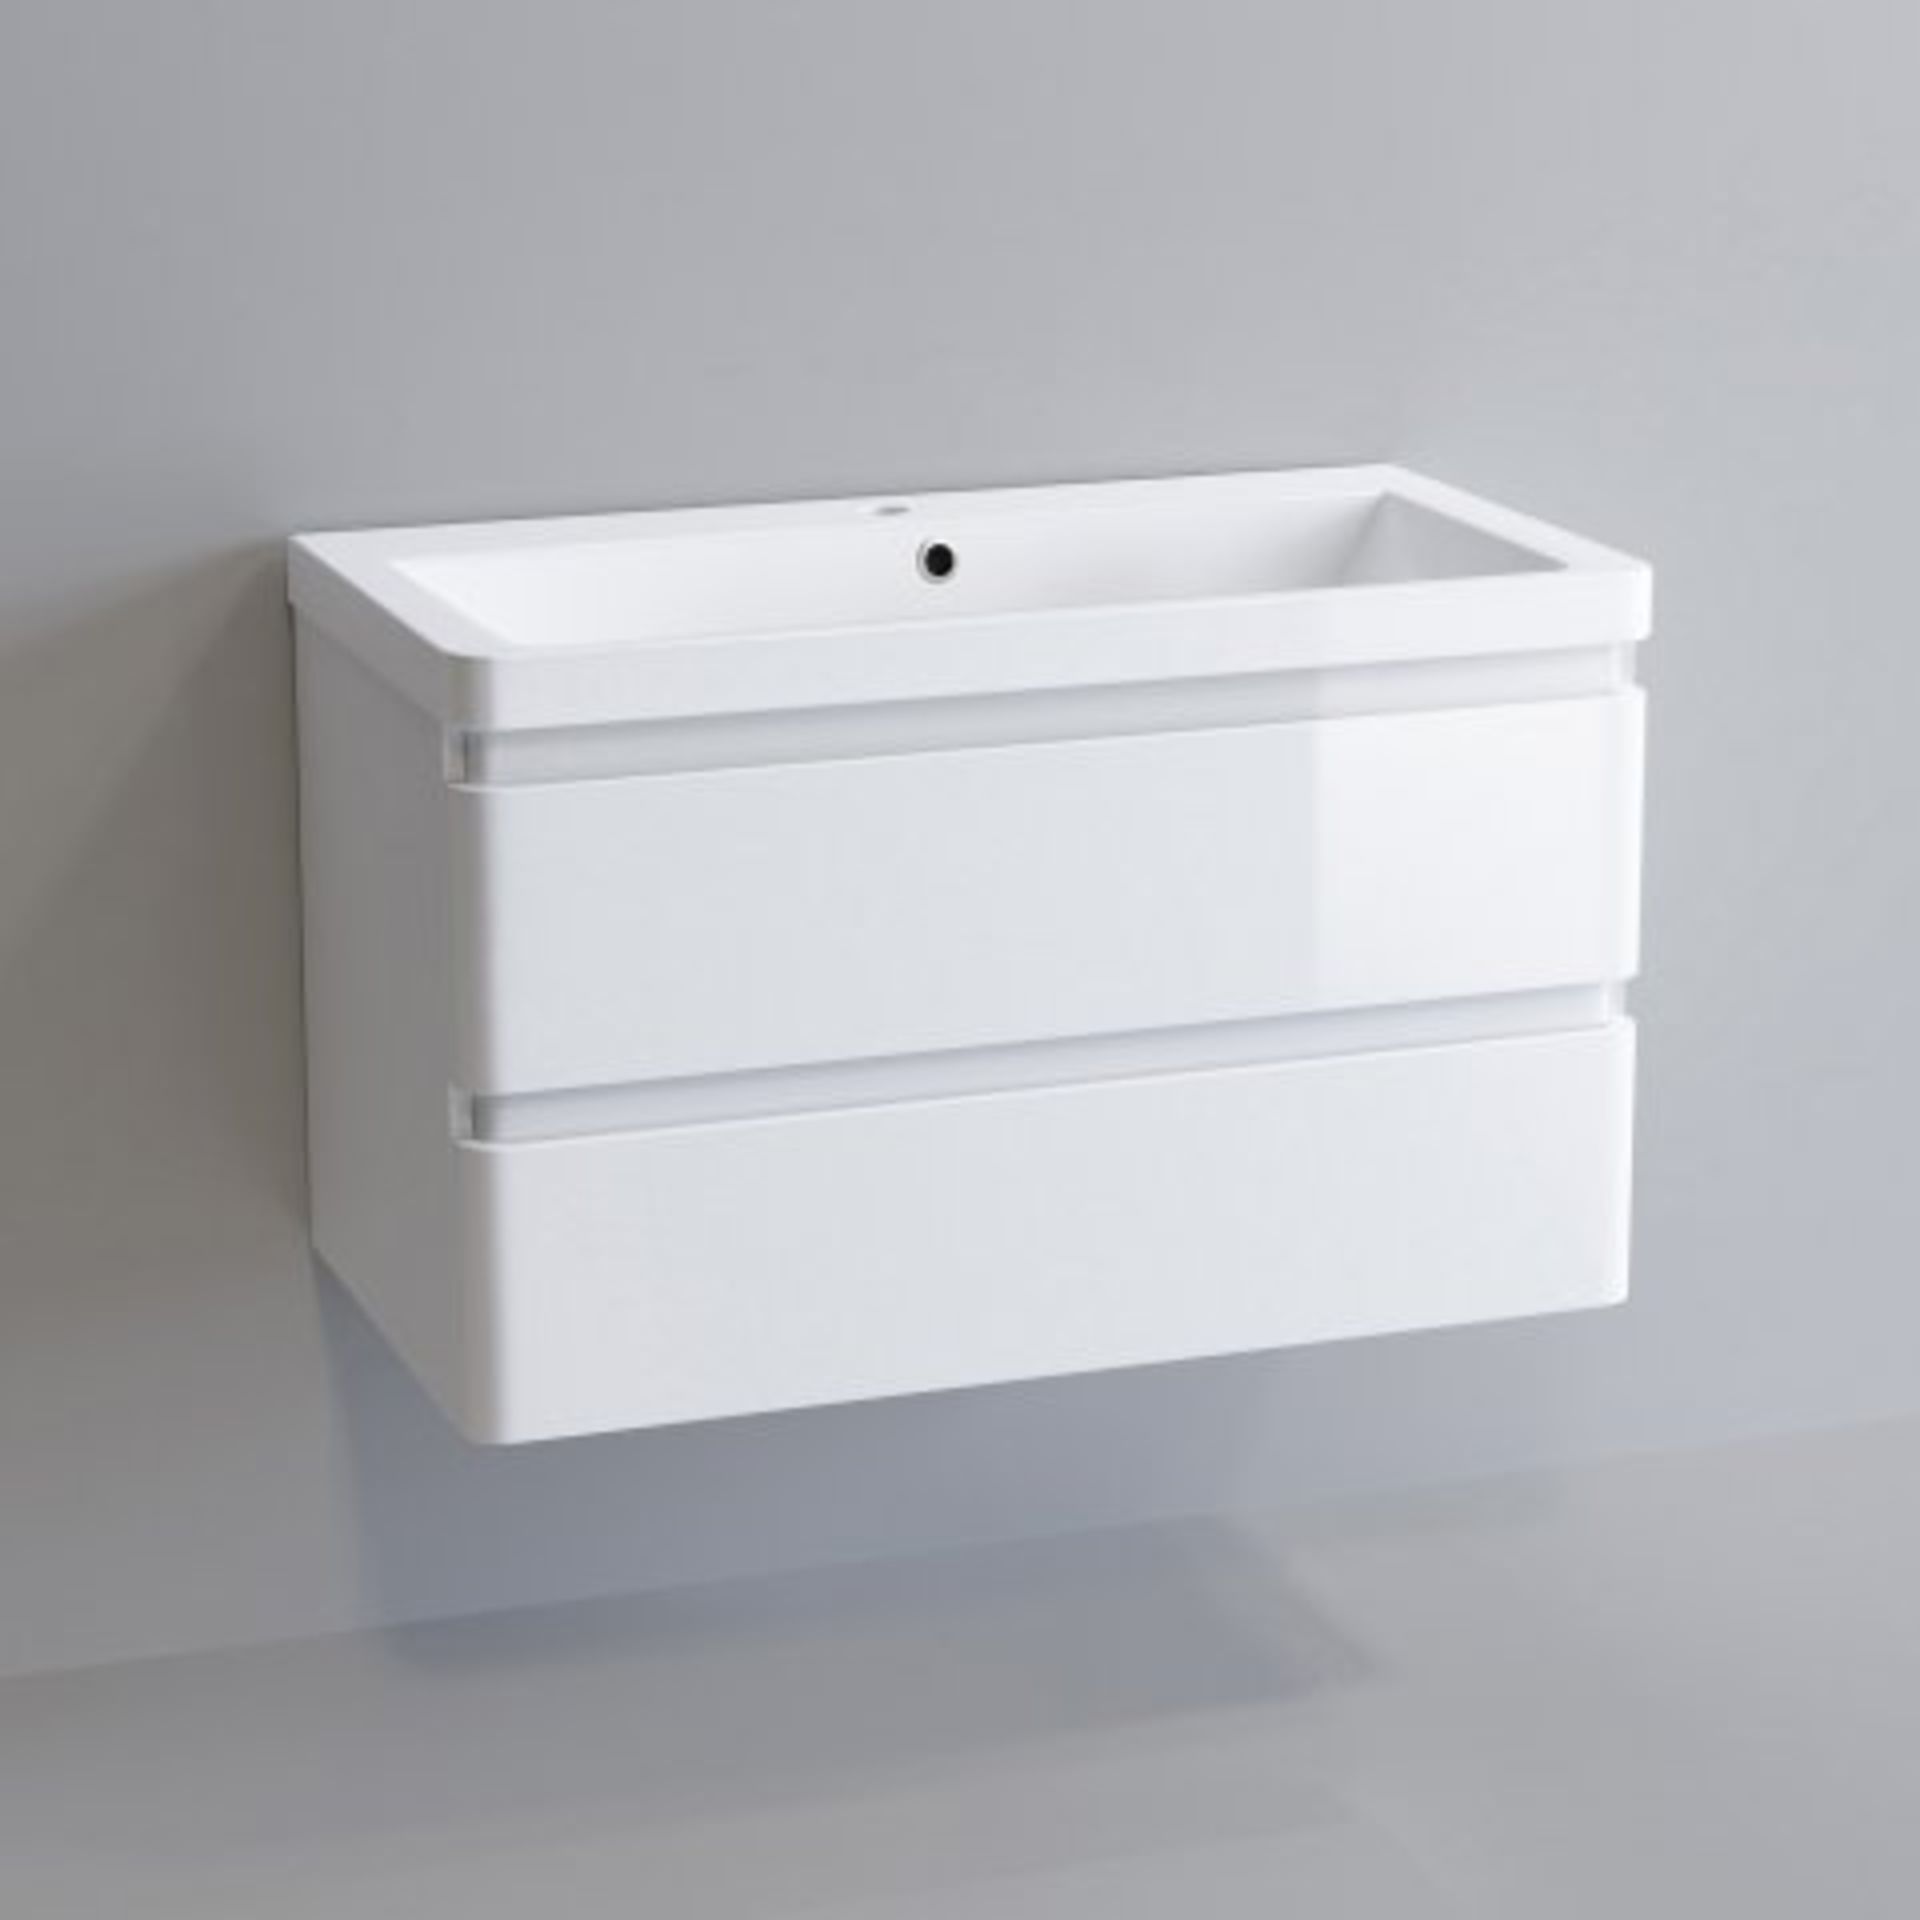 (H17) 800mm Denver II Gloss White Built In Basin Drawer Unit - Wall Hung. RRP £599.99. COMES - Image 4 of 4